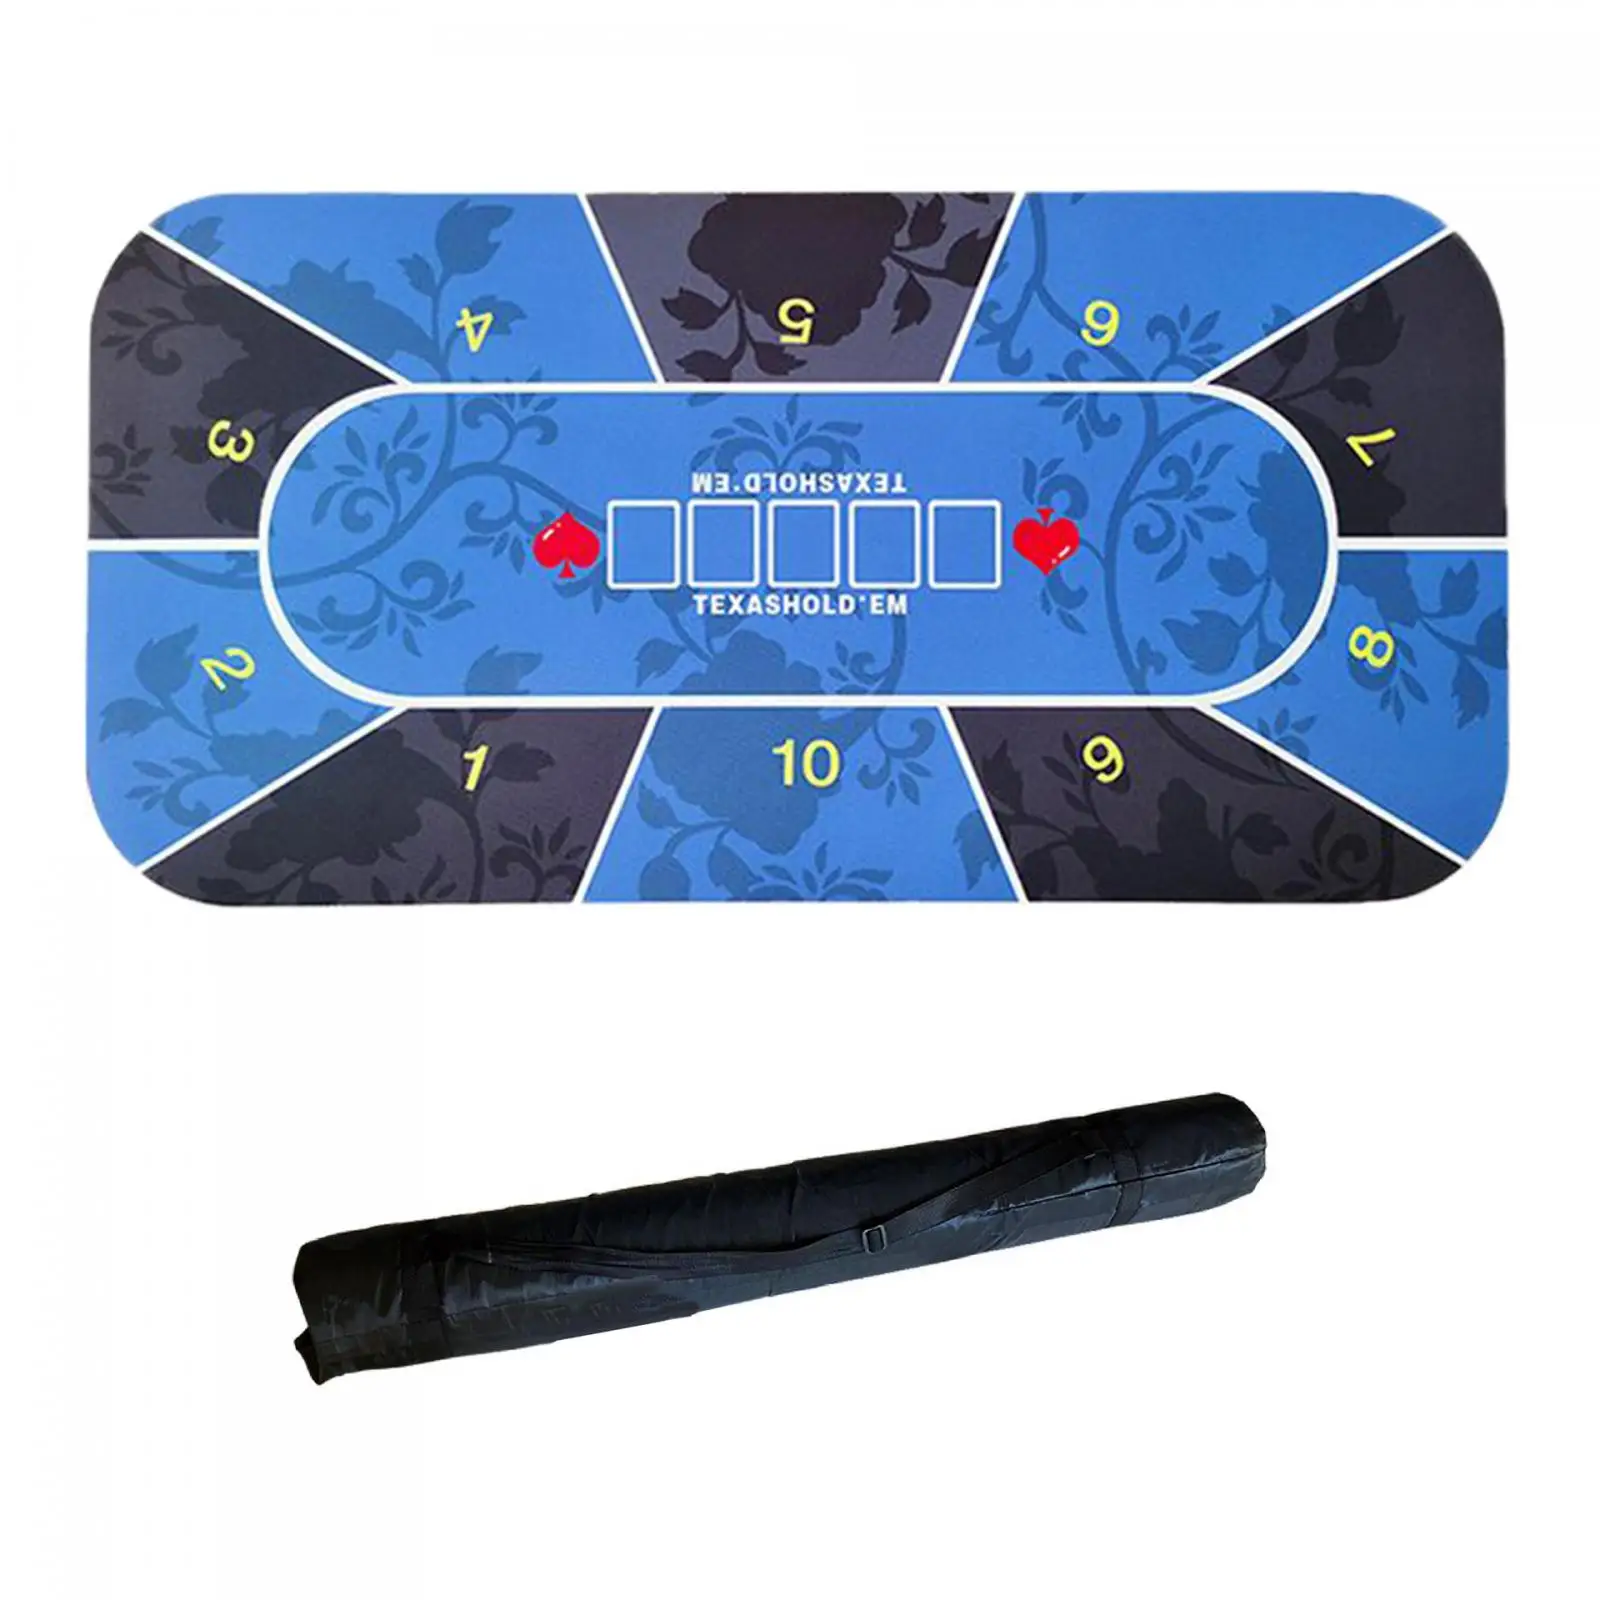 Poker Table Layout Tabletop Mat Roll-up Craps Gaming Table Top Pad Felt